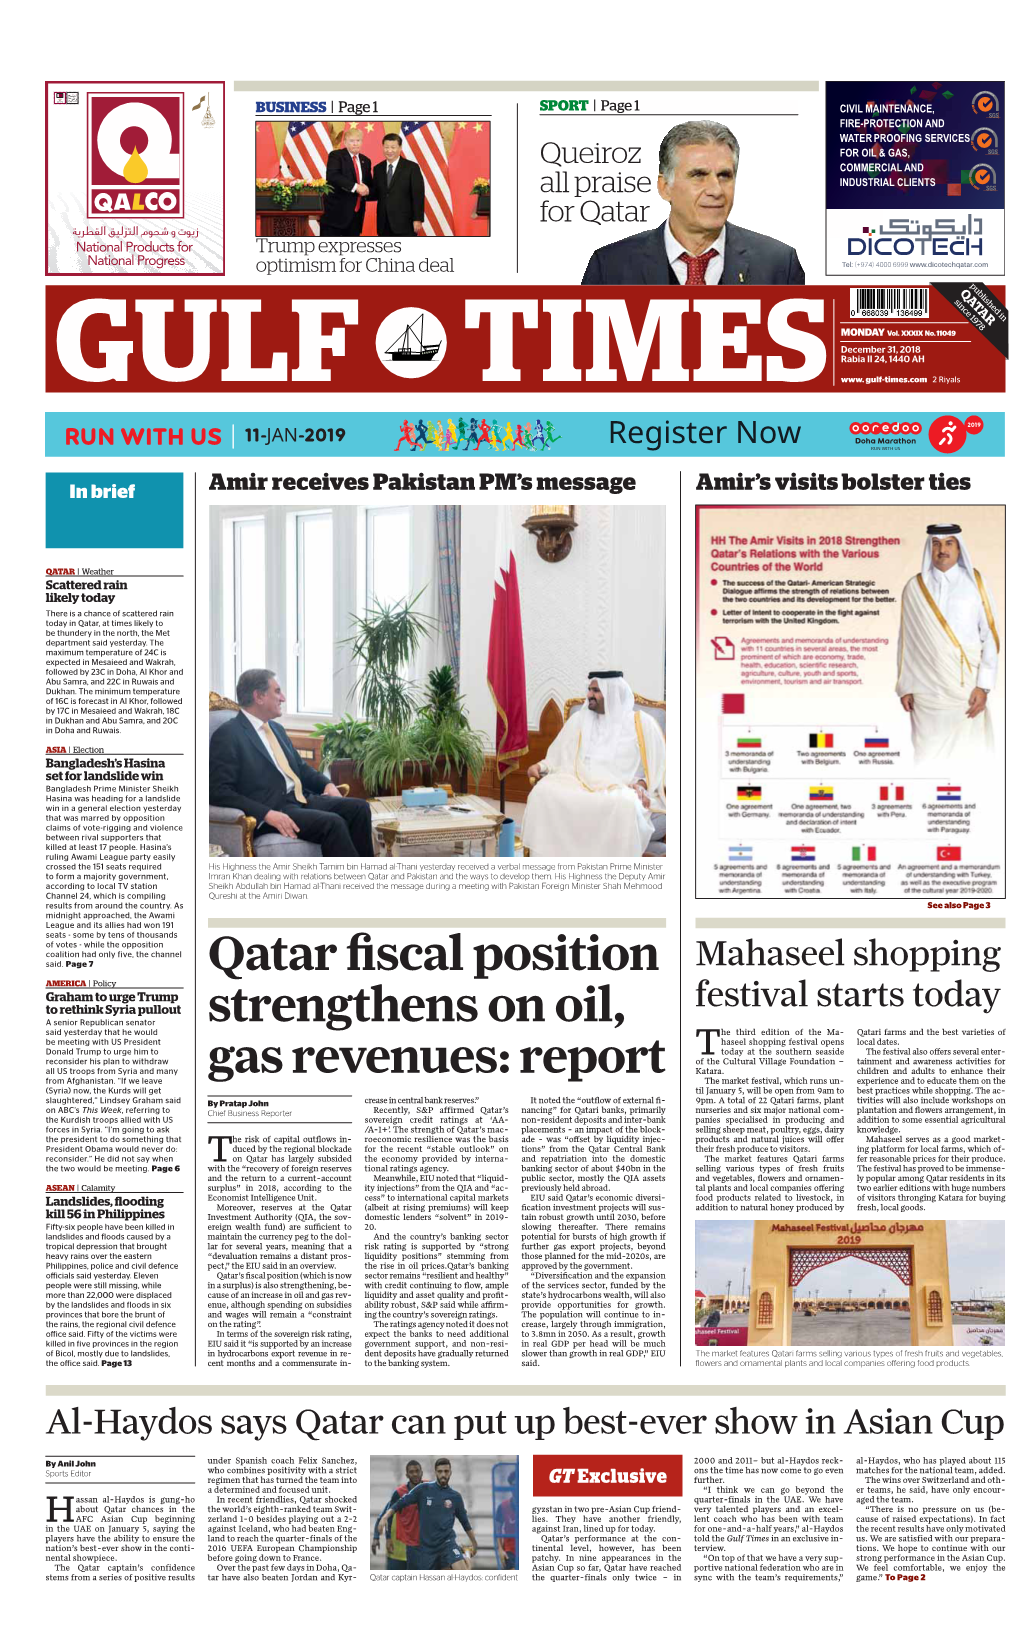 Qatar Fiscal Position Strengthens on Oil, Gas Revenues